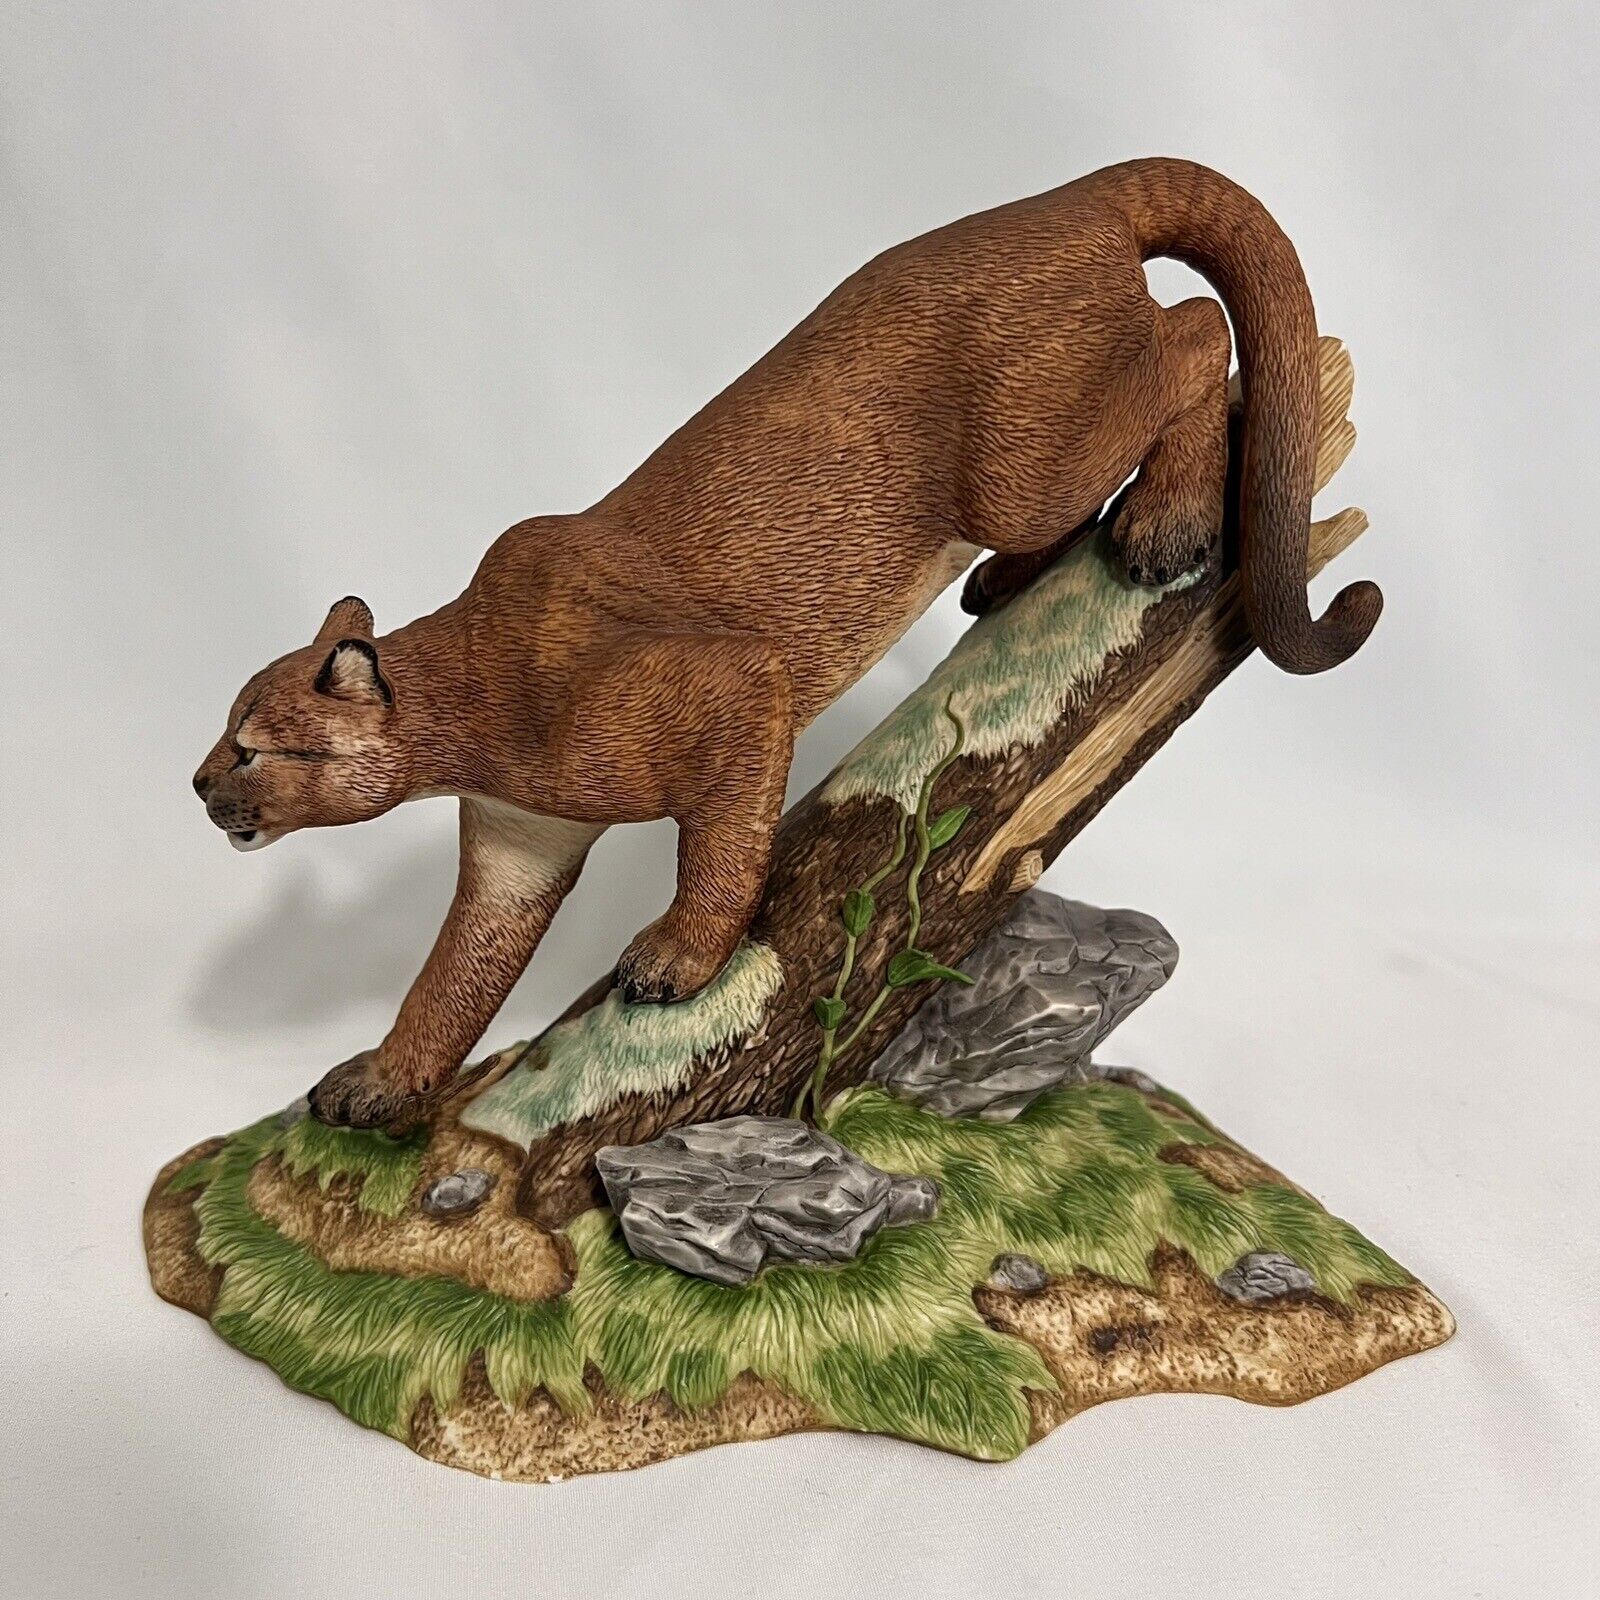 Lenox Wildlife of the Seven Continents Puma South America 1986 Porcelain